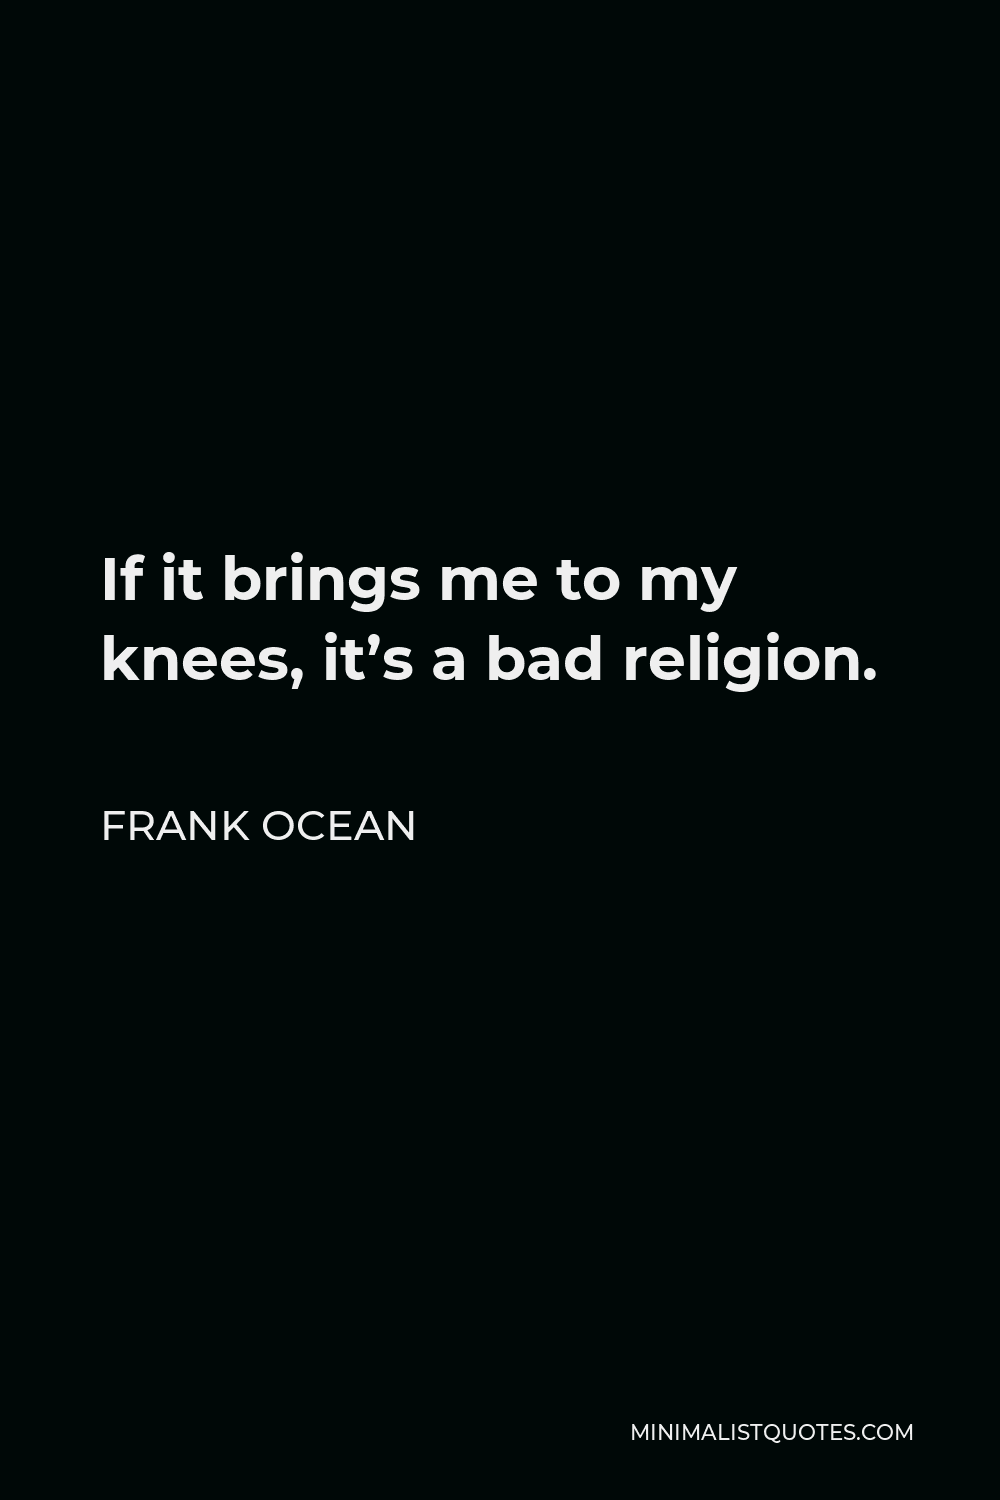 Frank Ocean Quote If It Brings Me To My Knees It S A Bad Religion